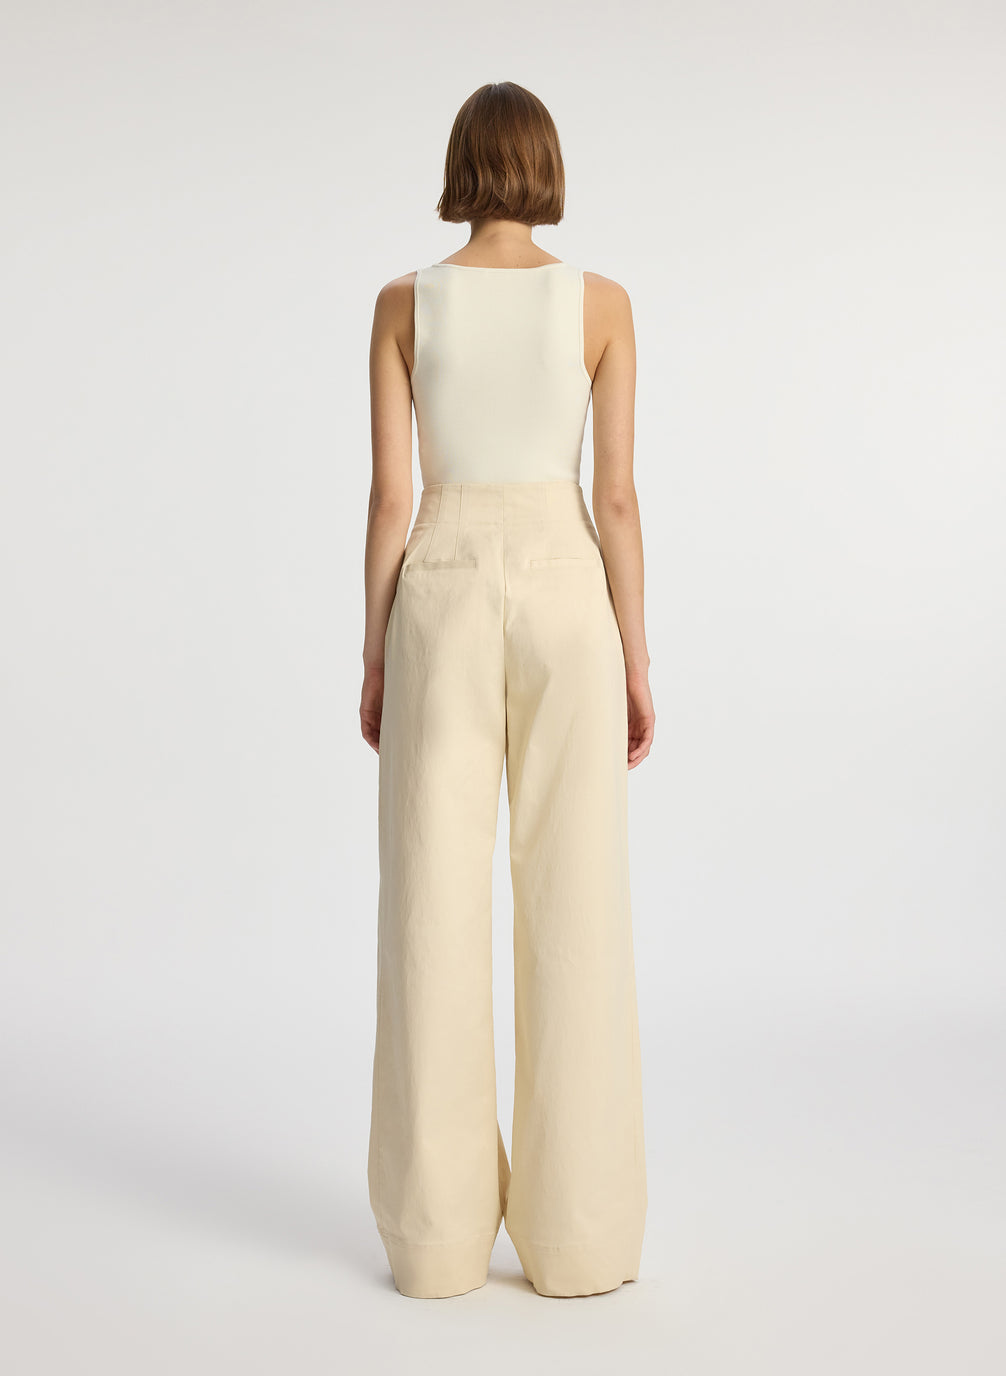 back view of woman wearing beige compact knit tank top and beige sateen wide leg pants